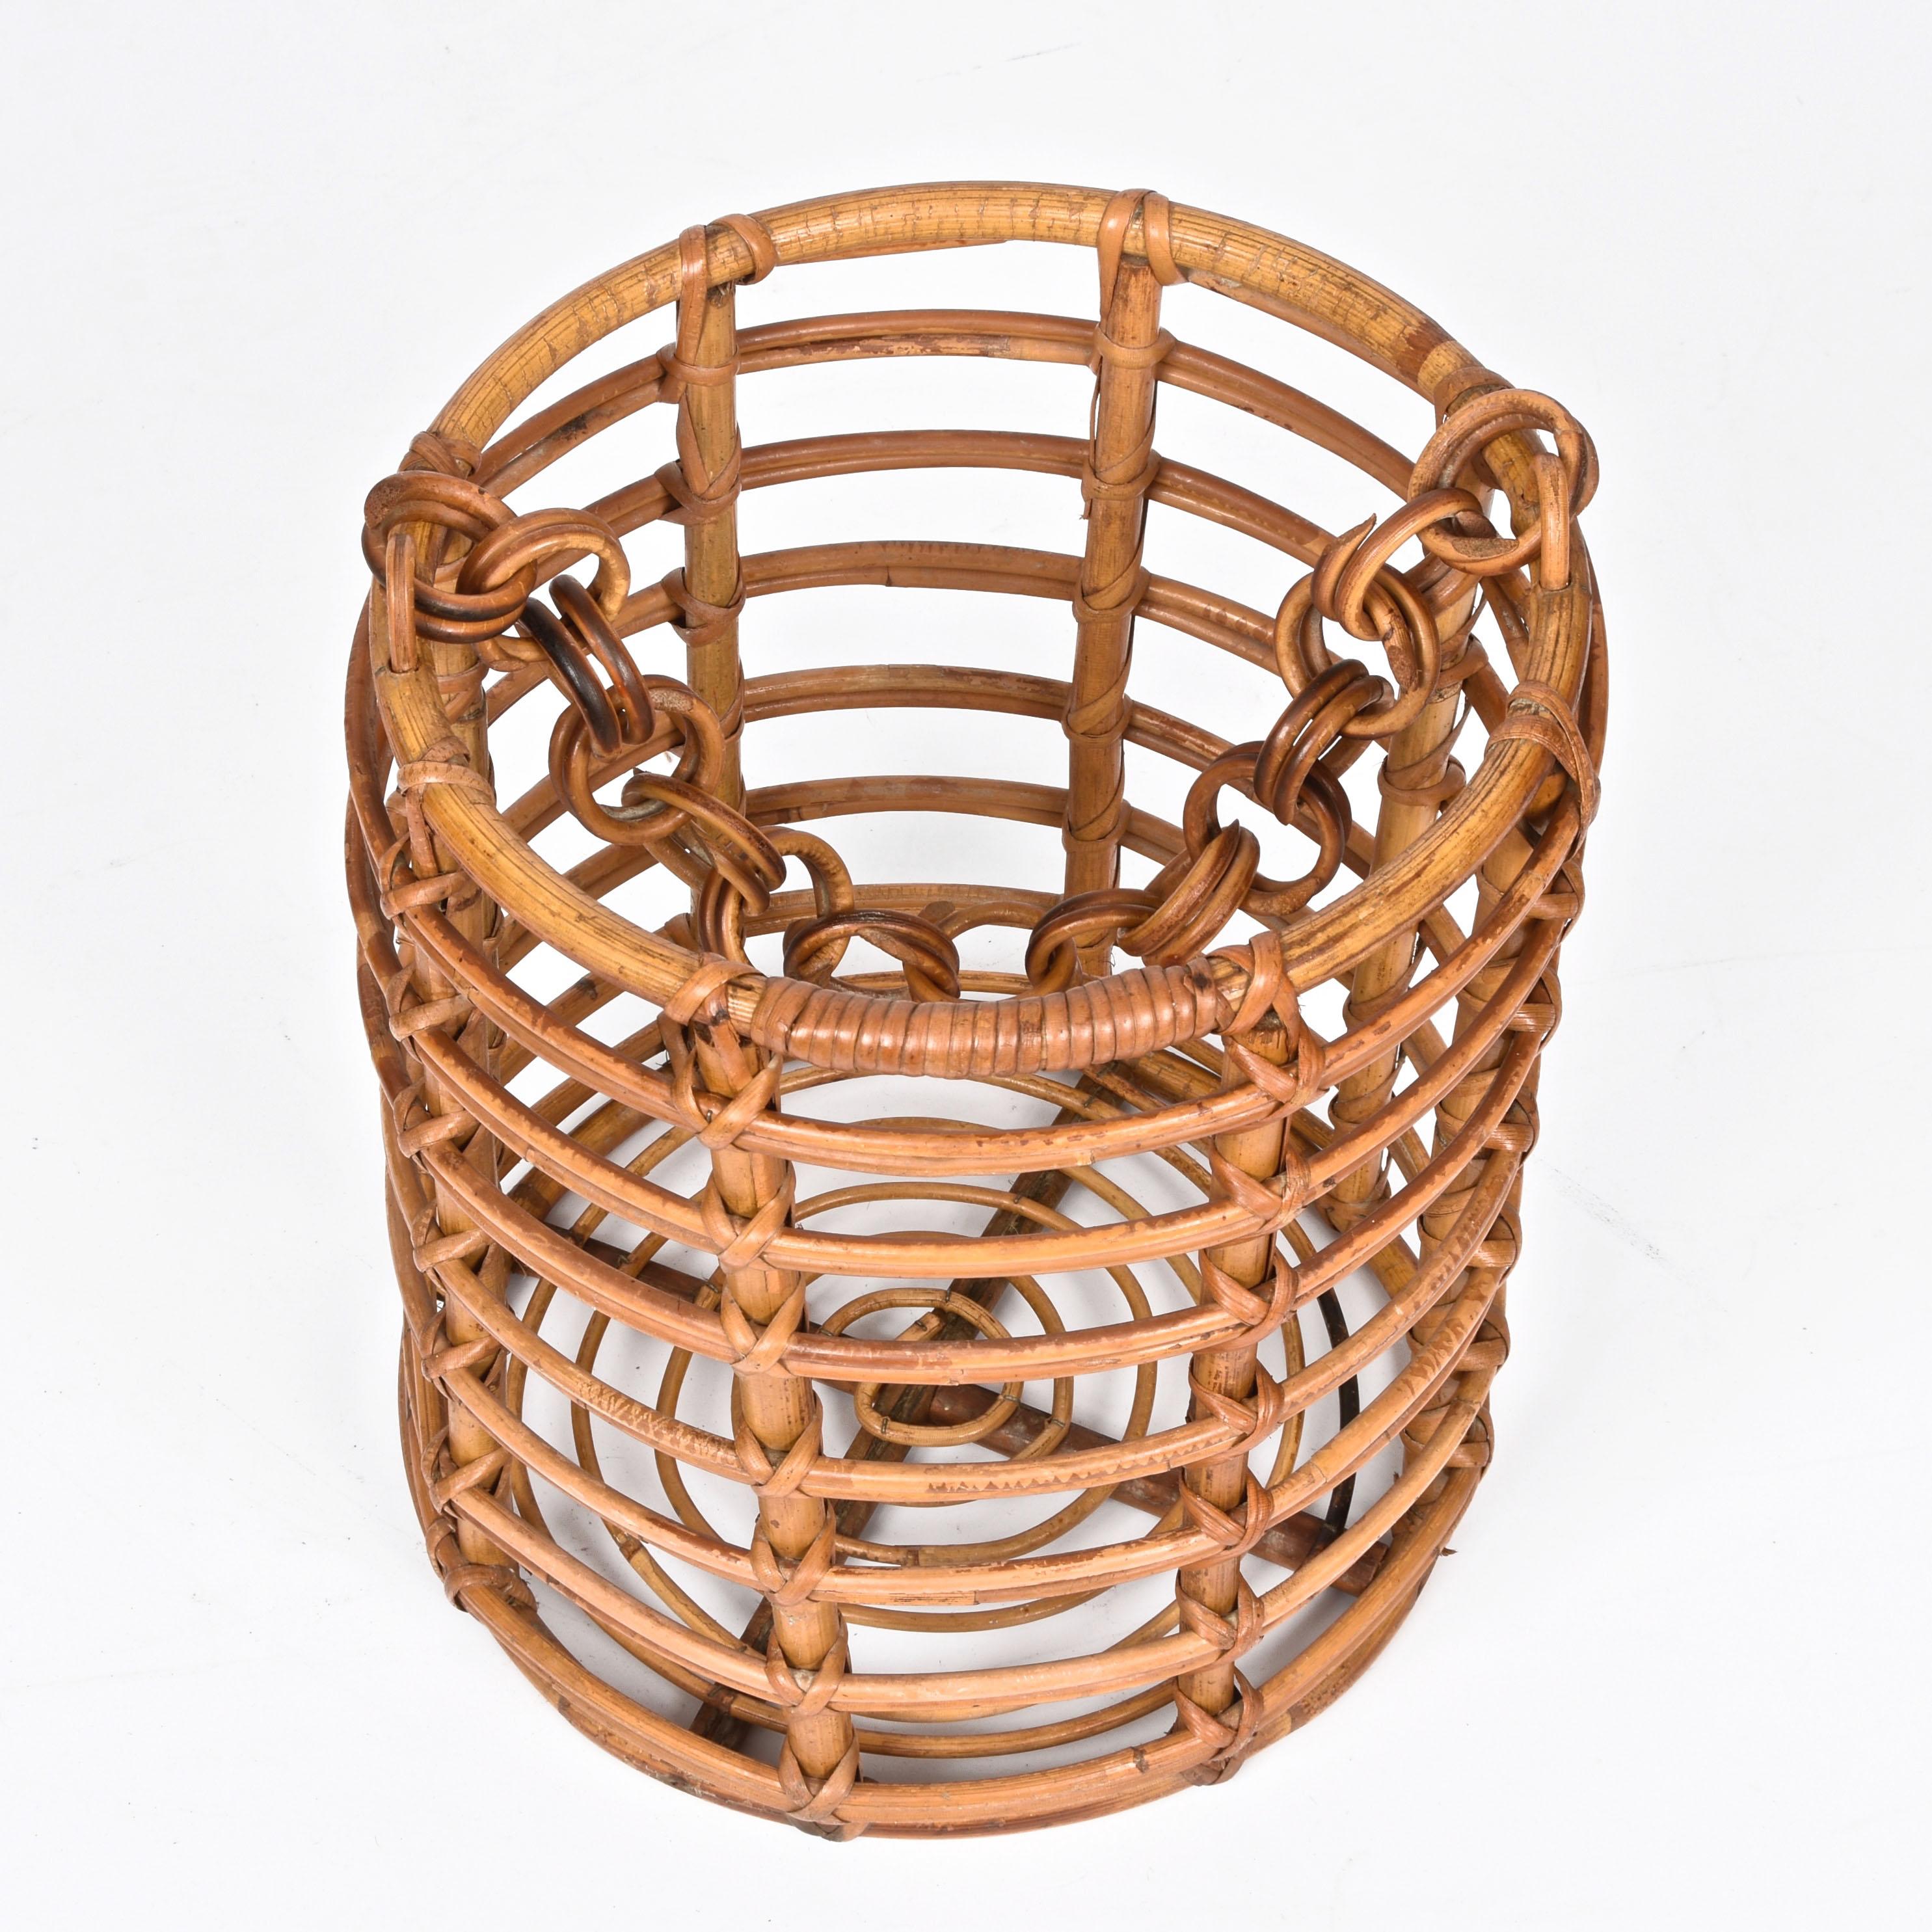 Midcentury round bamboo and rattan magazine rack. This fantastic piece was designed in Italy during the 1960s.

This item is magnificent as it has a solid bamboo structure completed by round rattan lines.

This marvelous magazine rack will